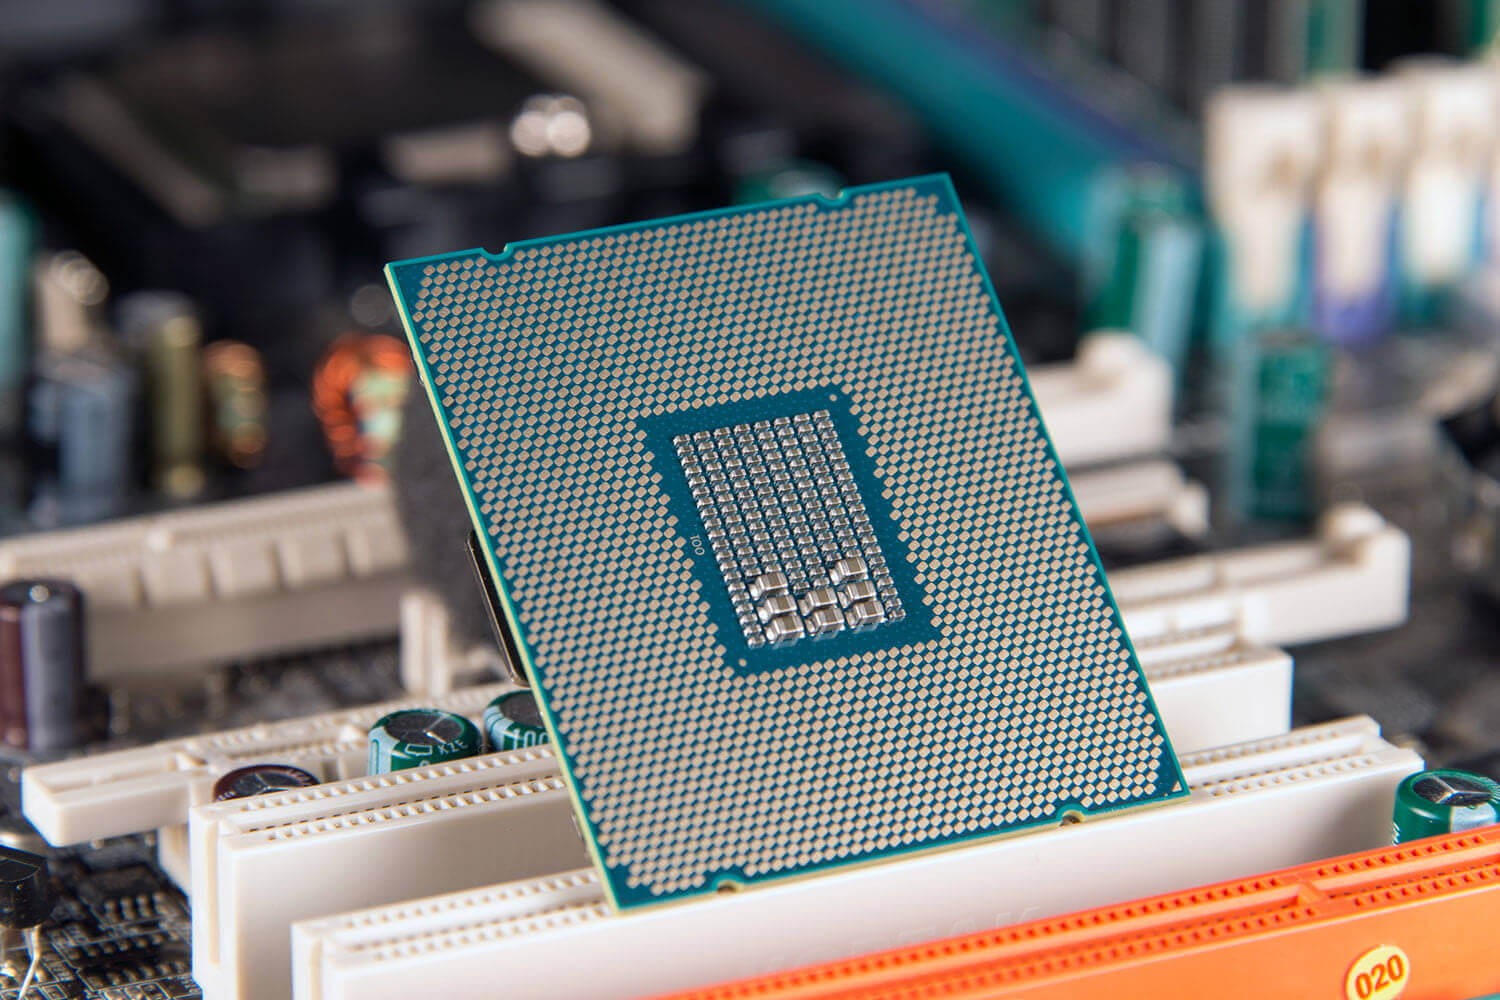 Intel Core i7-9700K tips up on Geekbench